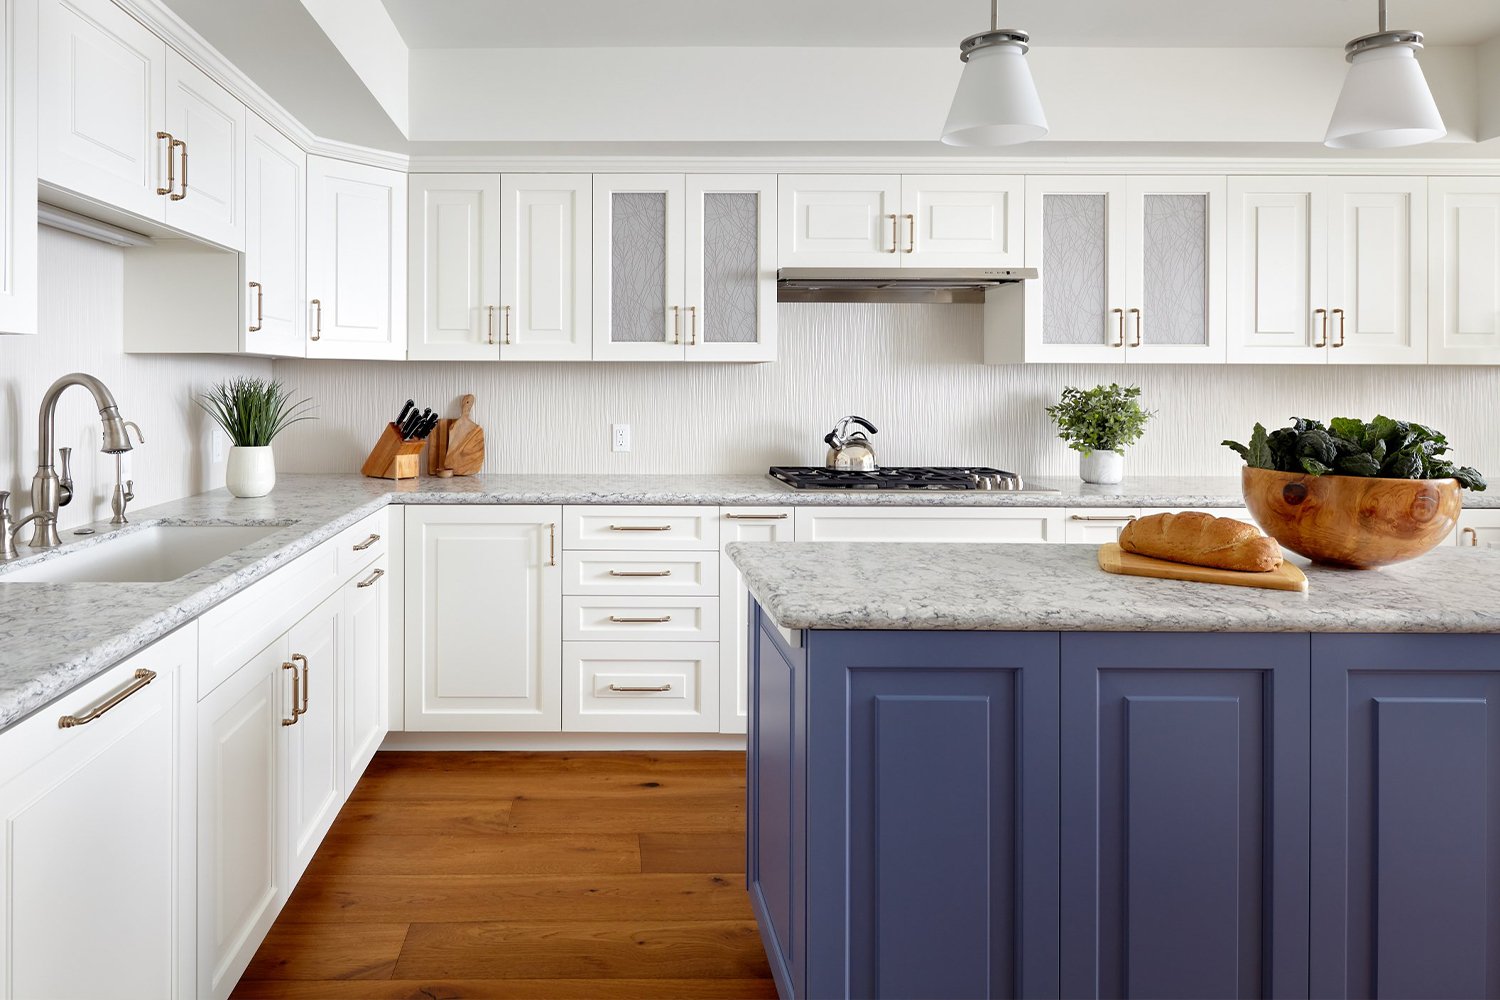 A Los Gatos kitchen features bright white cabinetry and a blue island with some artful finishes.